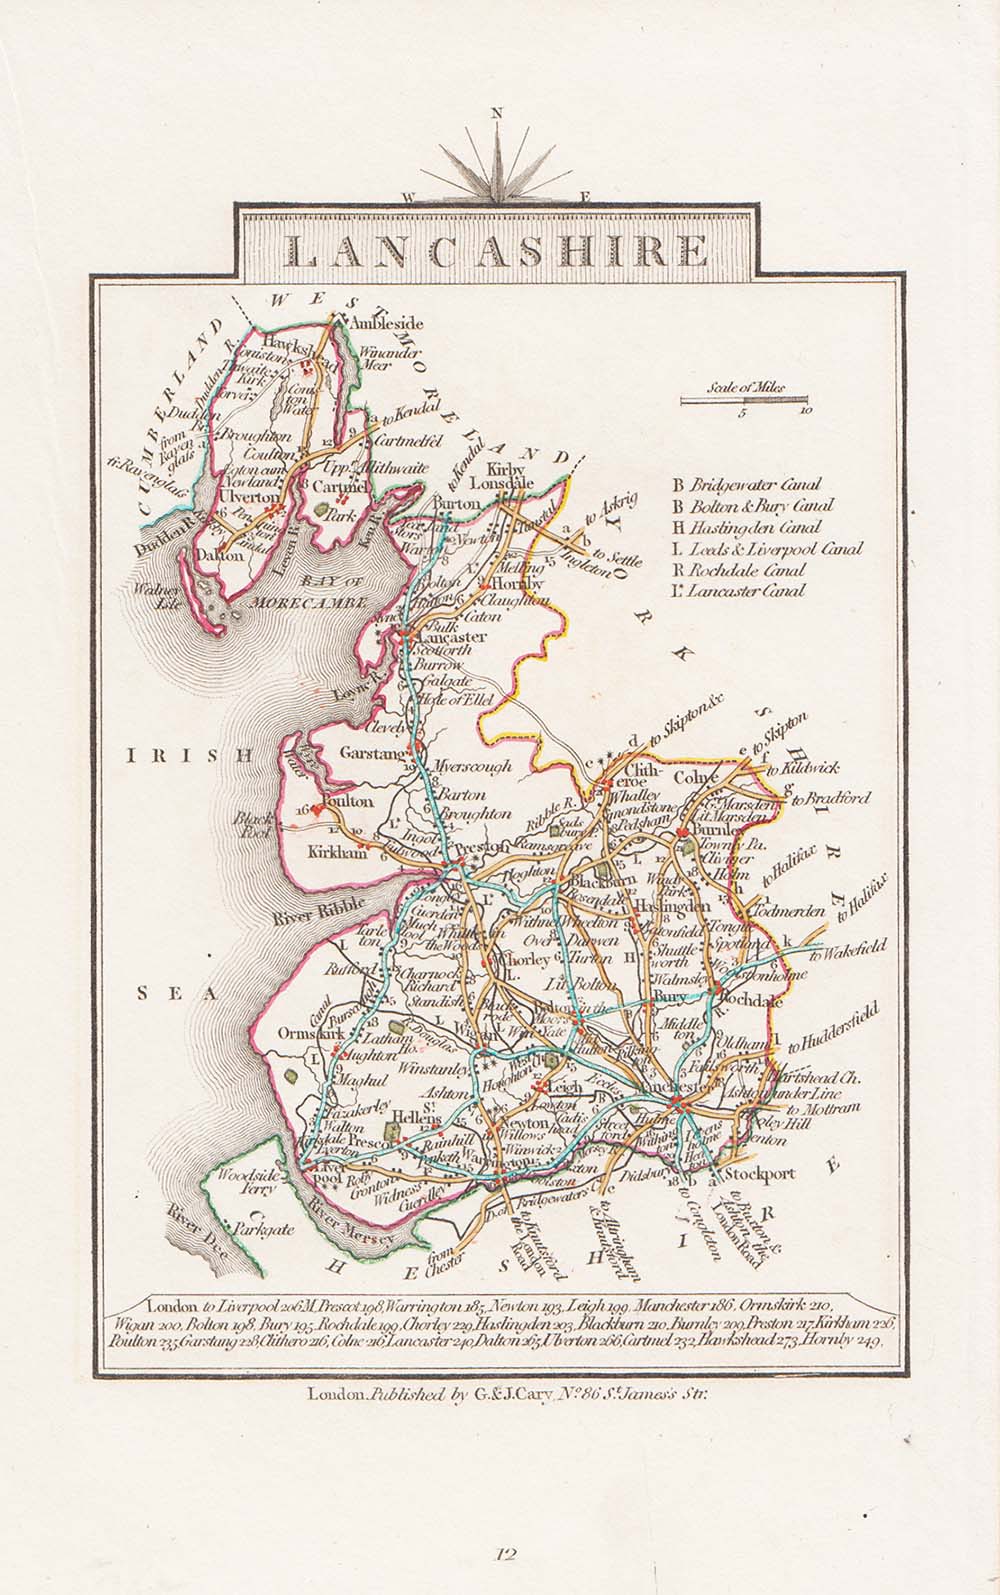 John Cary's New Map of England and Wales